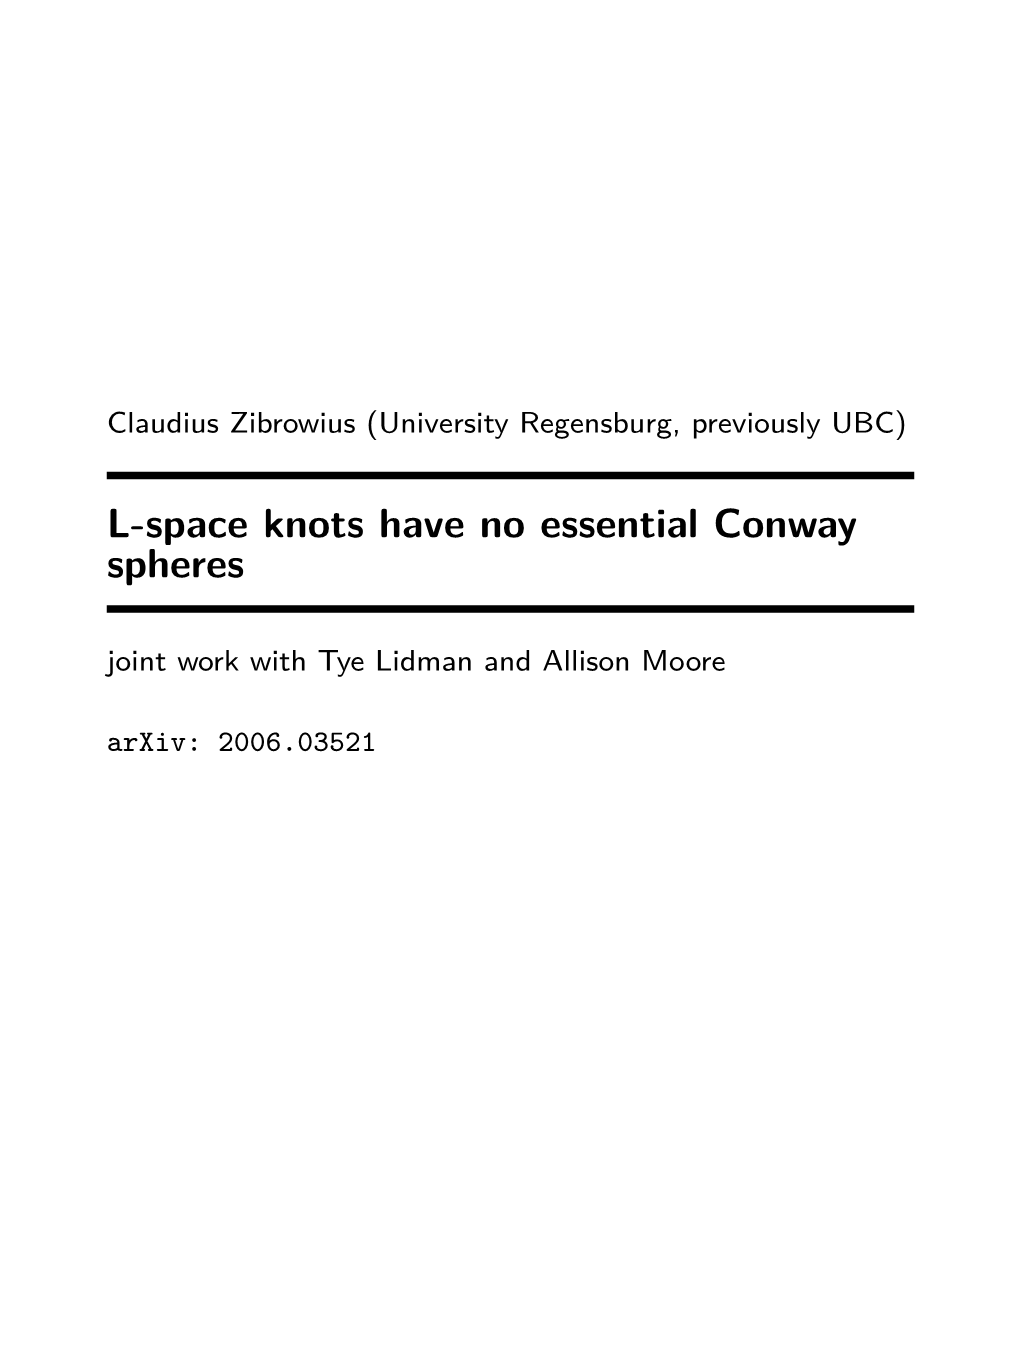 L-Space Knots Have No Essential Conway Spheres Joint Work with Tye Lidman and Allison Moore Arxiv: 2006.03521 L-Spaces